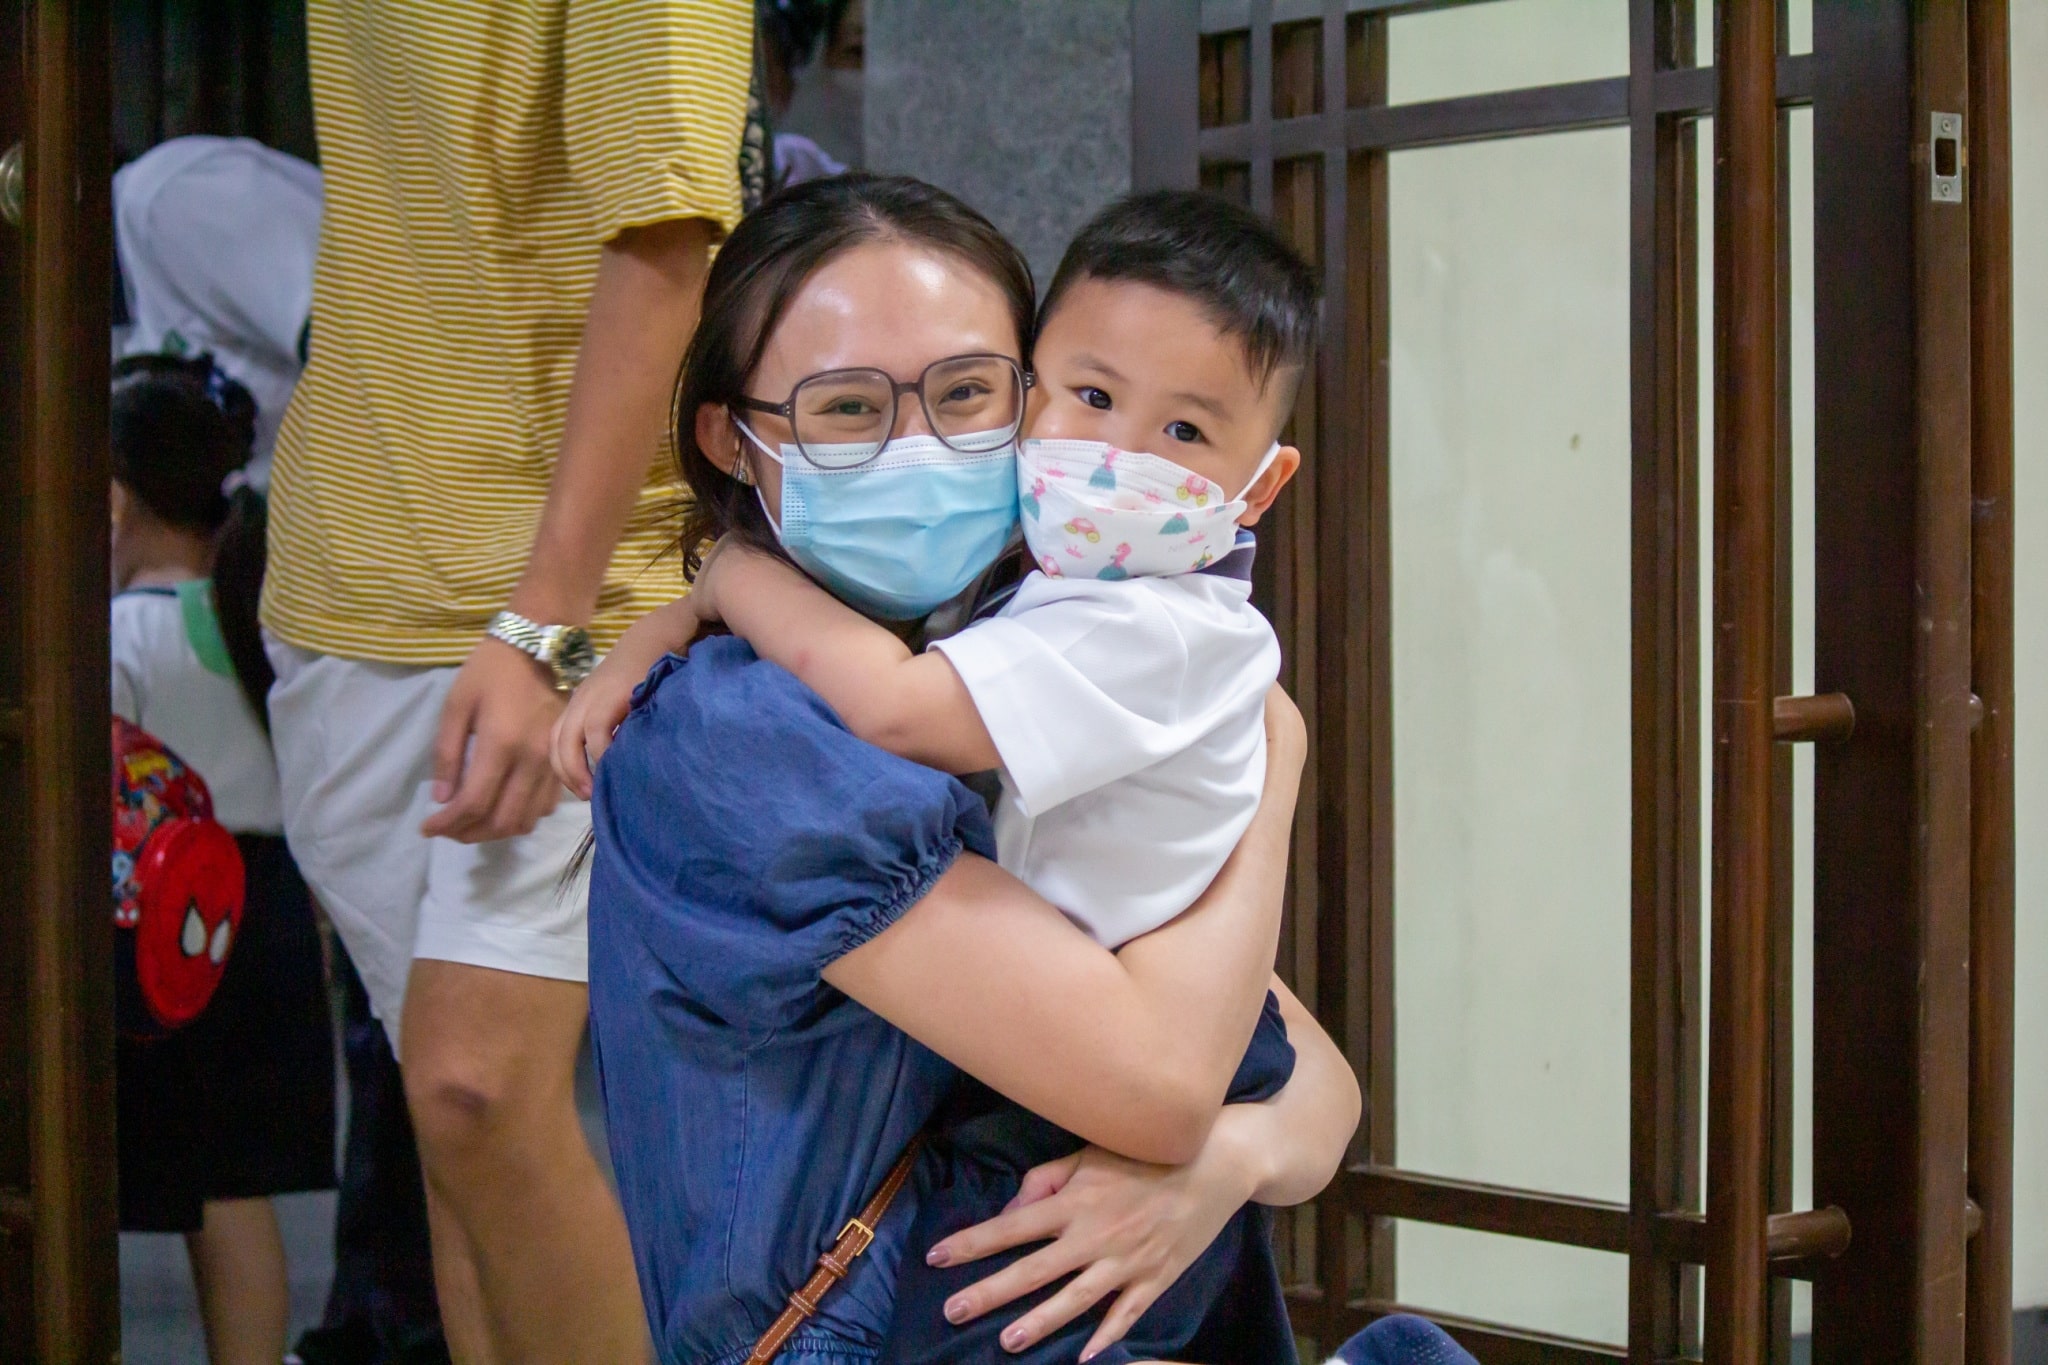 “When my son comes home from school, he’s always saying ‘Gan en’ (Thank you), and I can see he’s learning to behave well,” says Nancy Uy of her son Gavin who is enrolled at the Tzu Chi Great Love Preschool Philippines.【Photo by Marella Saldonido】